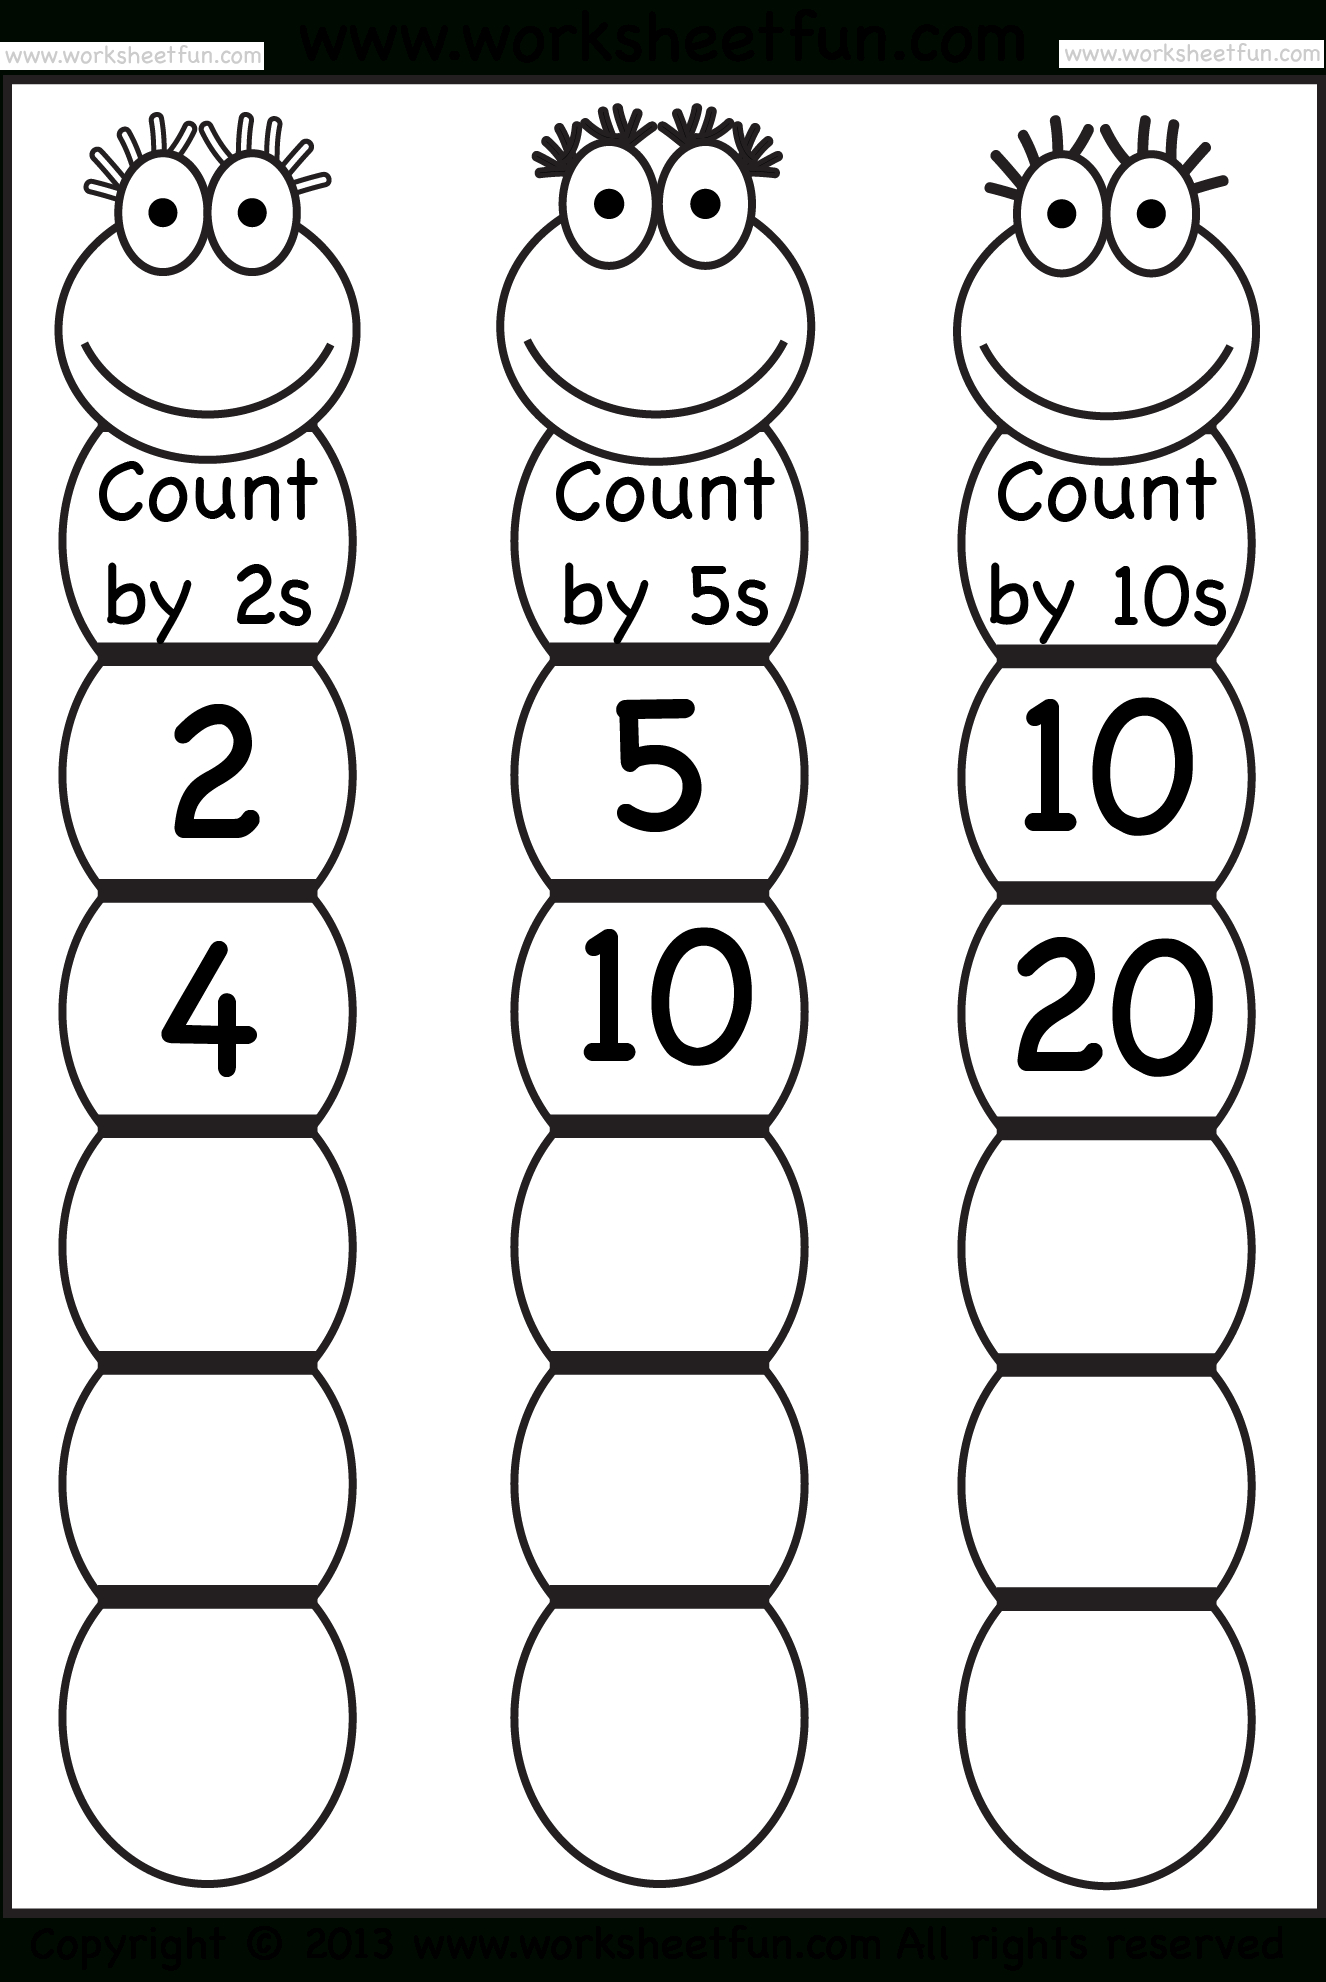 Here Is Printable Counting2 s Worksheet For Kindergarten Counting In Twos Worksheet Printable 